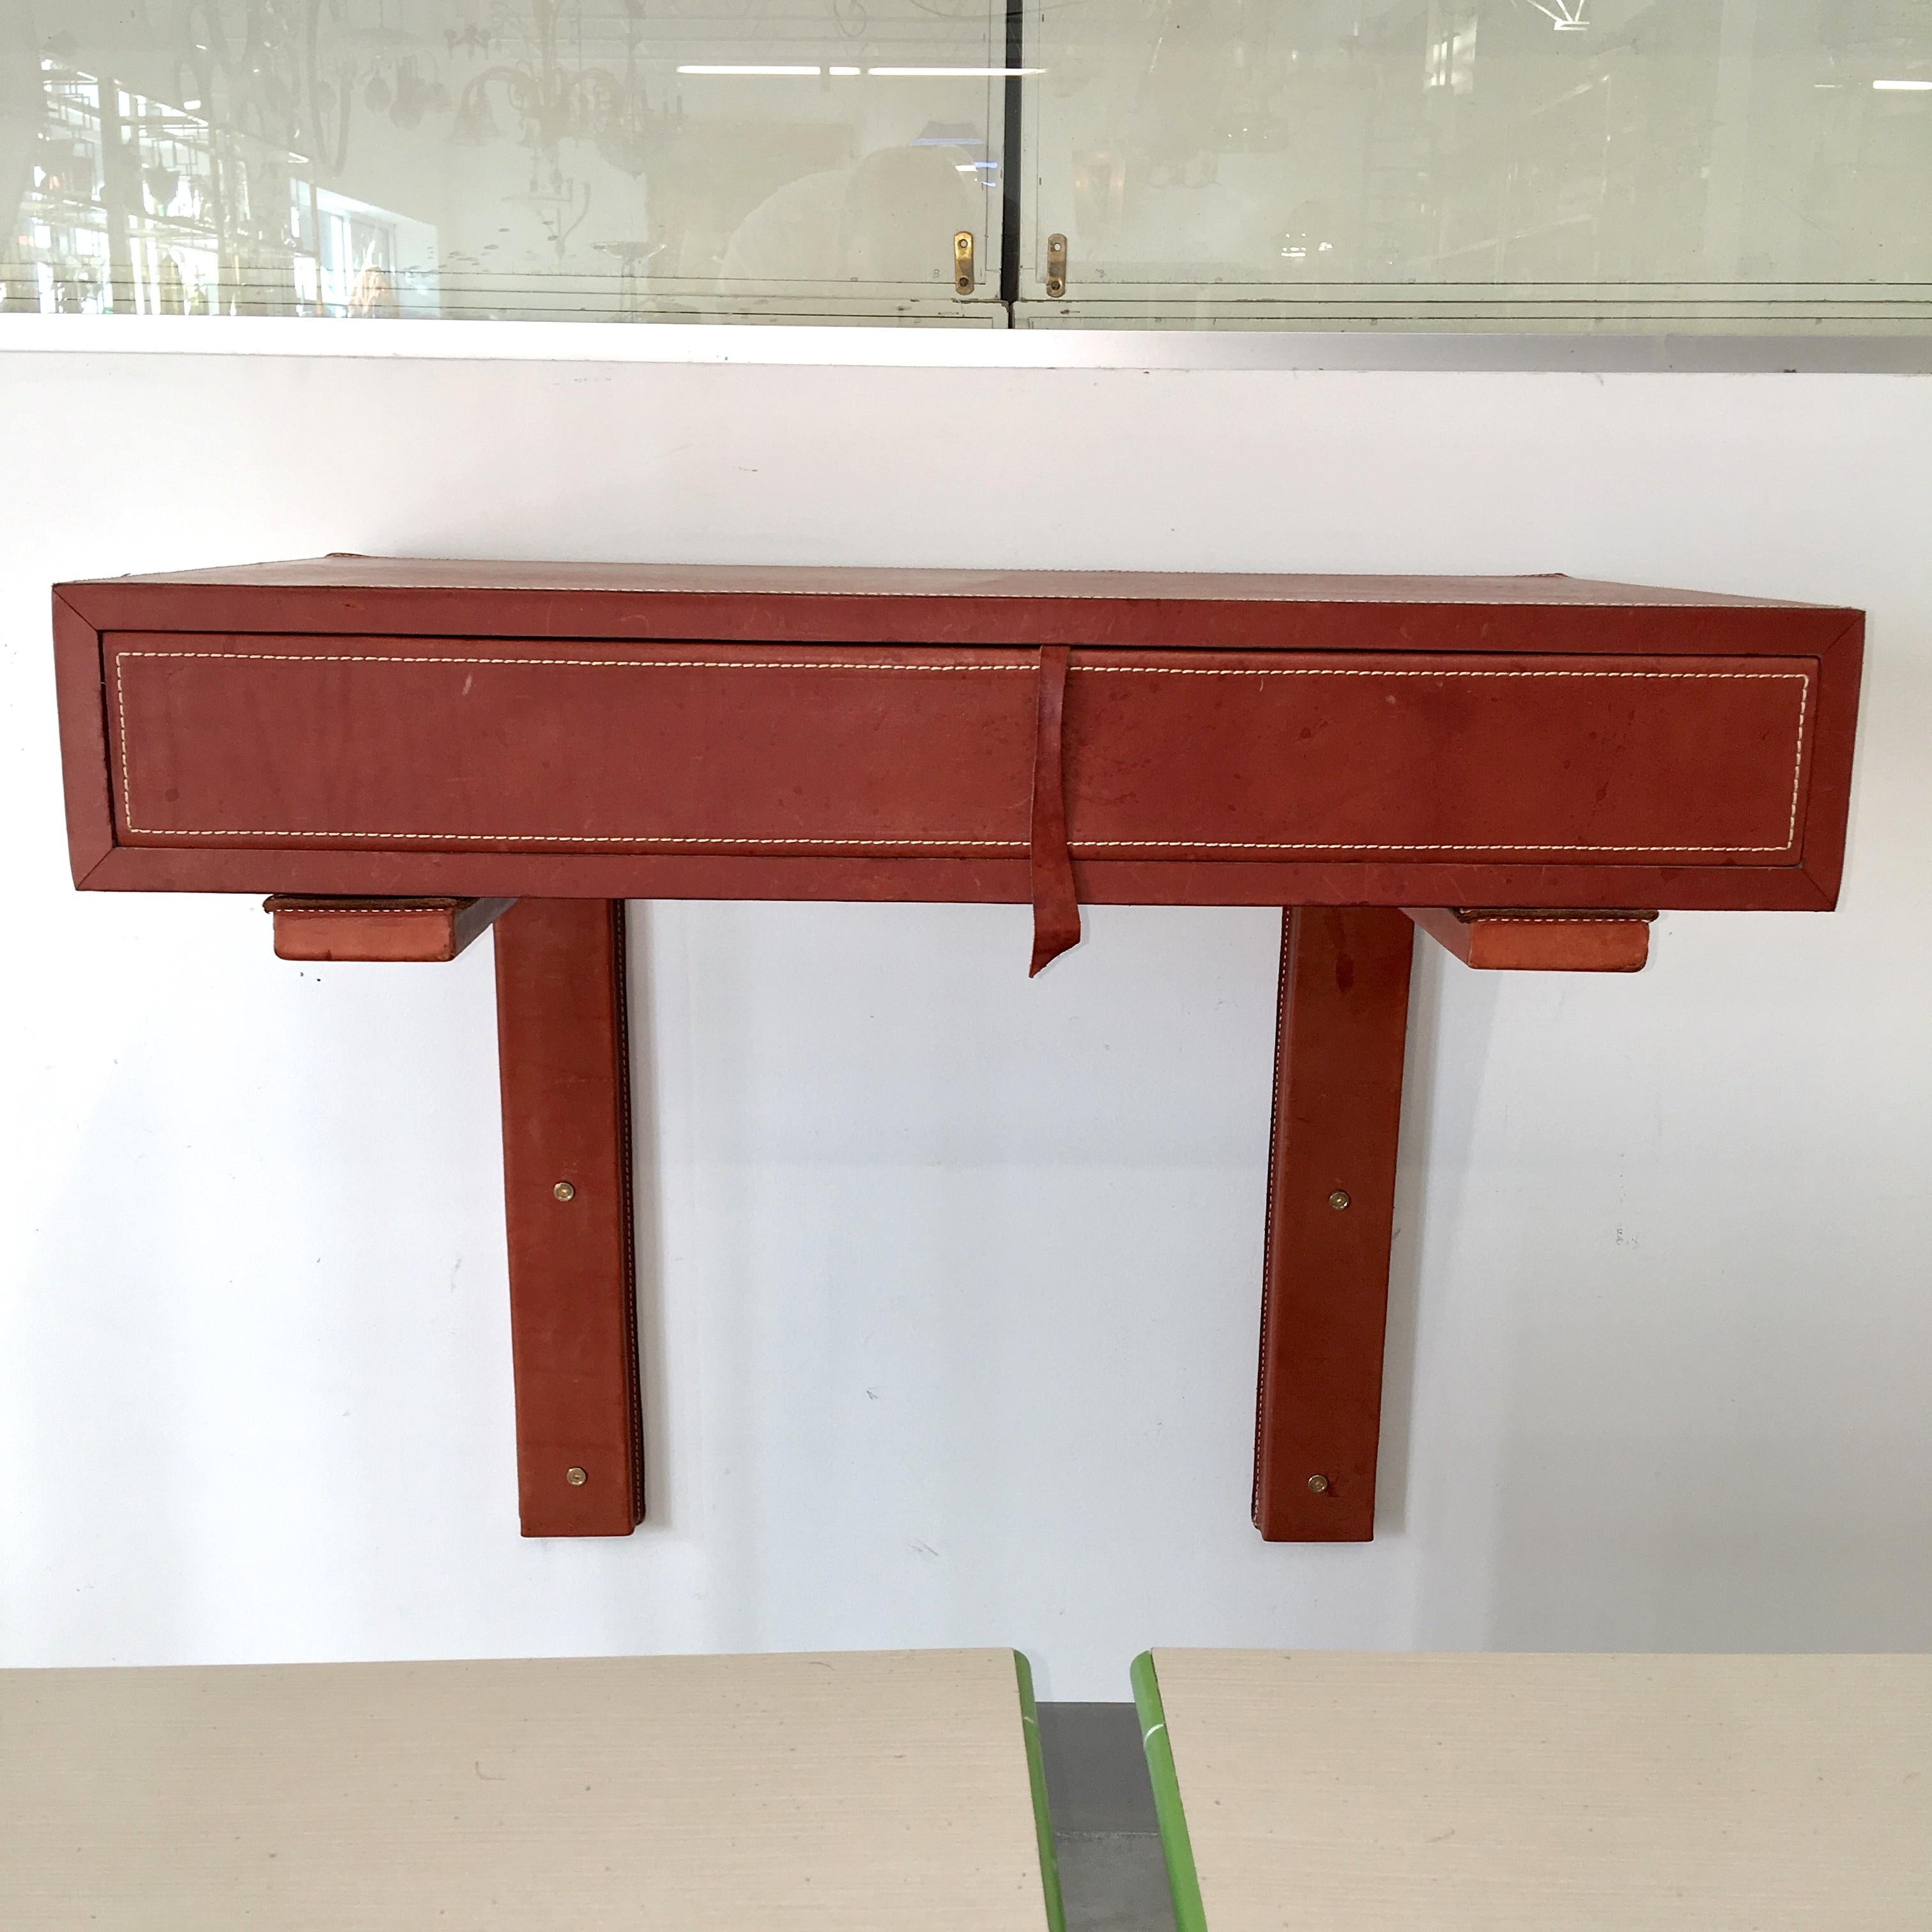 Adnet Style Saddle Stitched Leather Cantilevered Wall Console For Sale 2